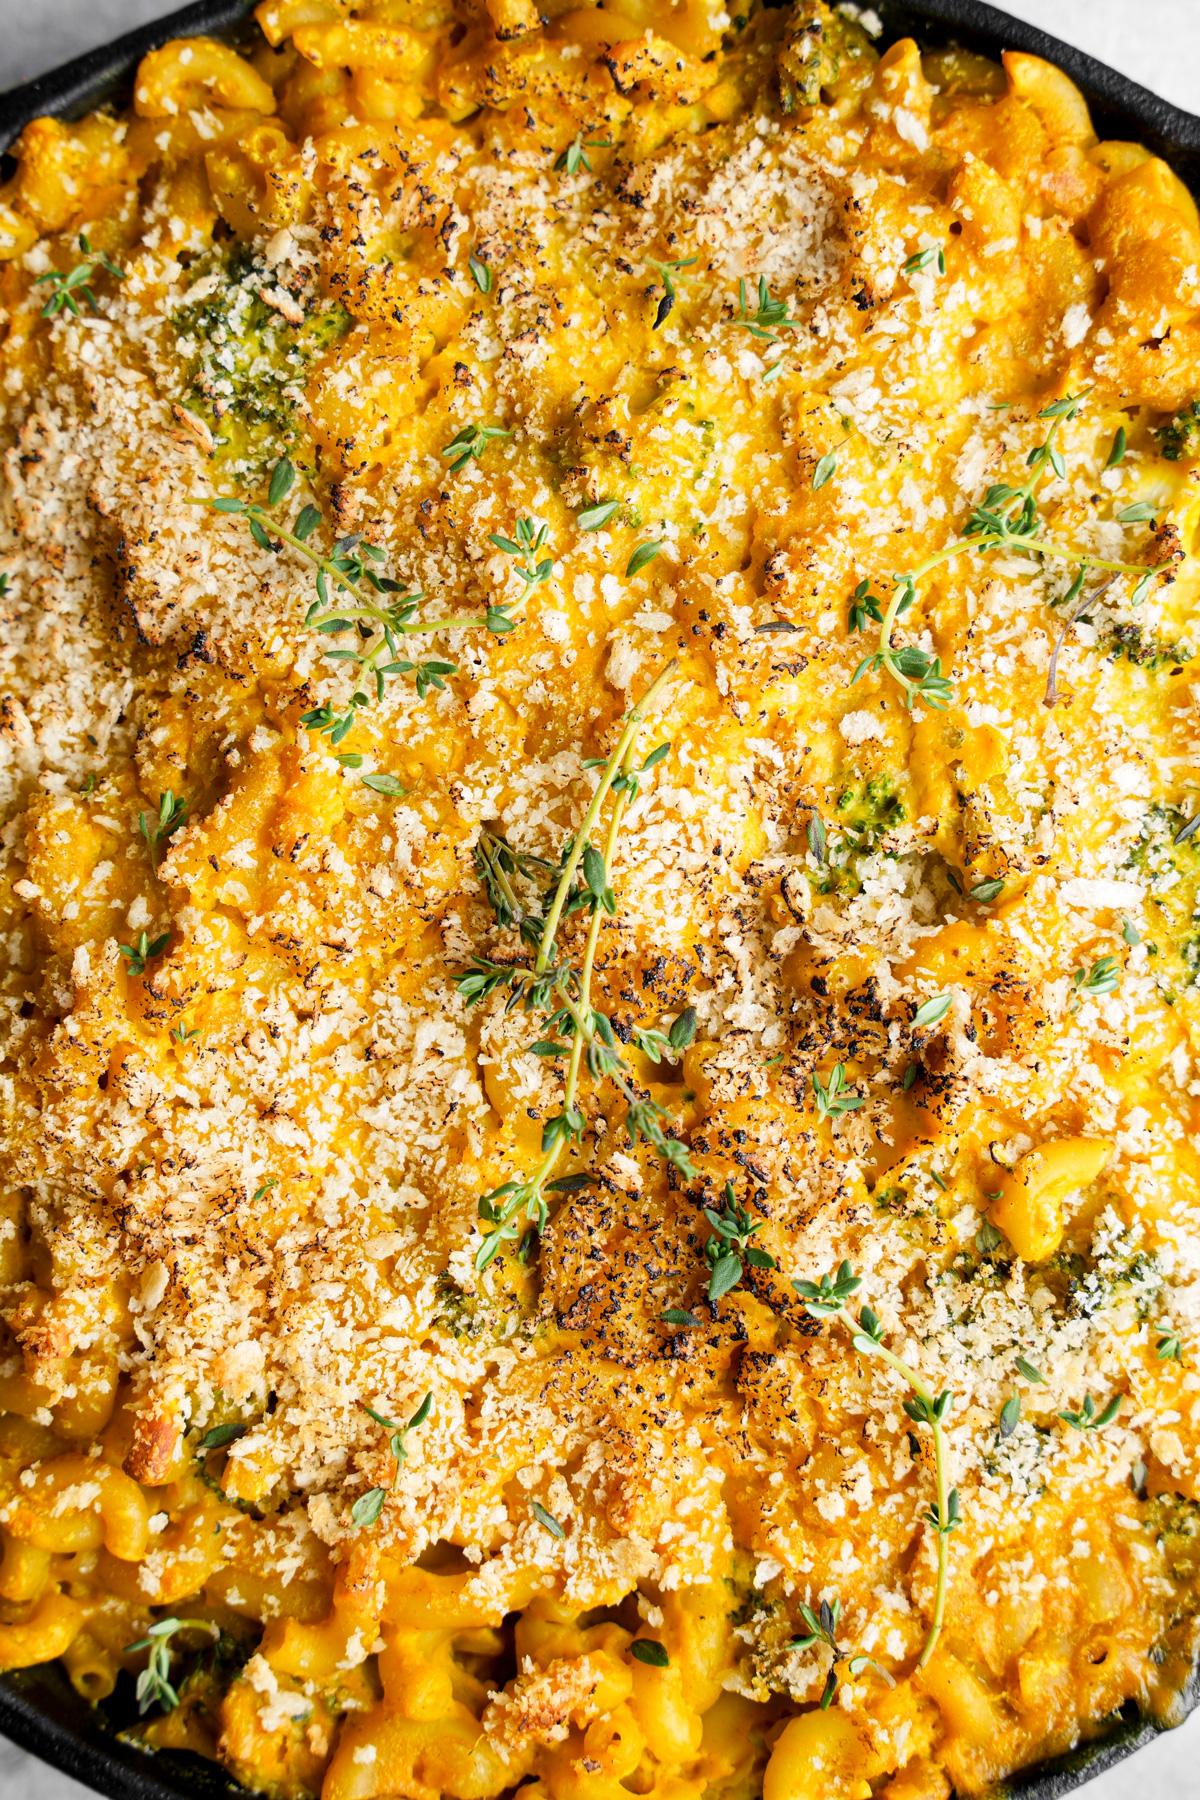 close up of the crunchy top of the nut free vegan mac and cheese